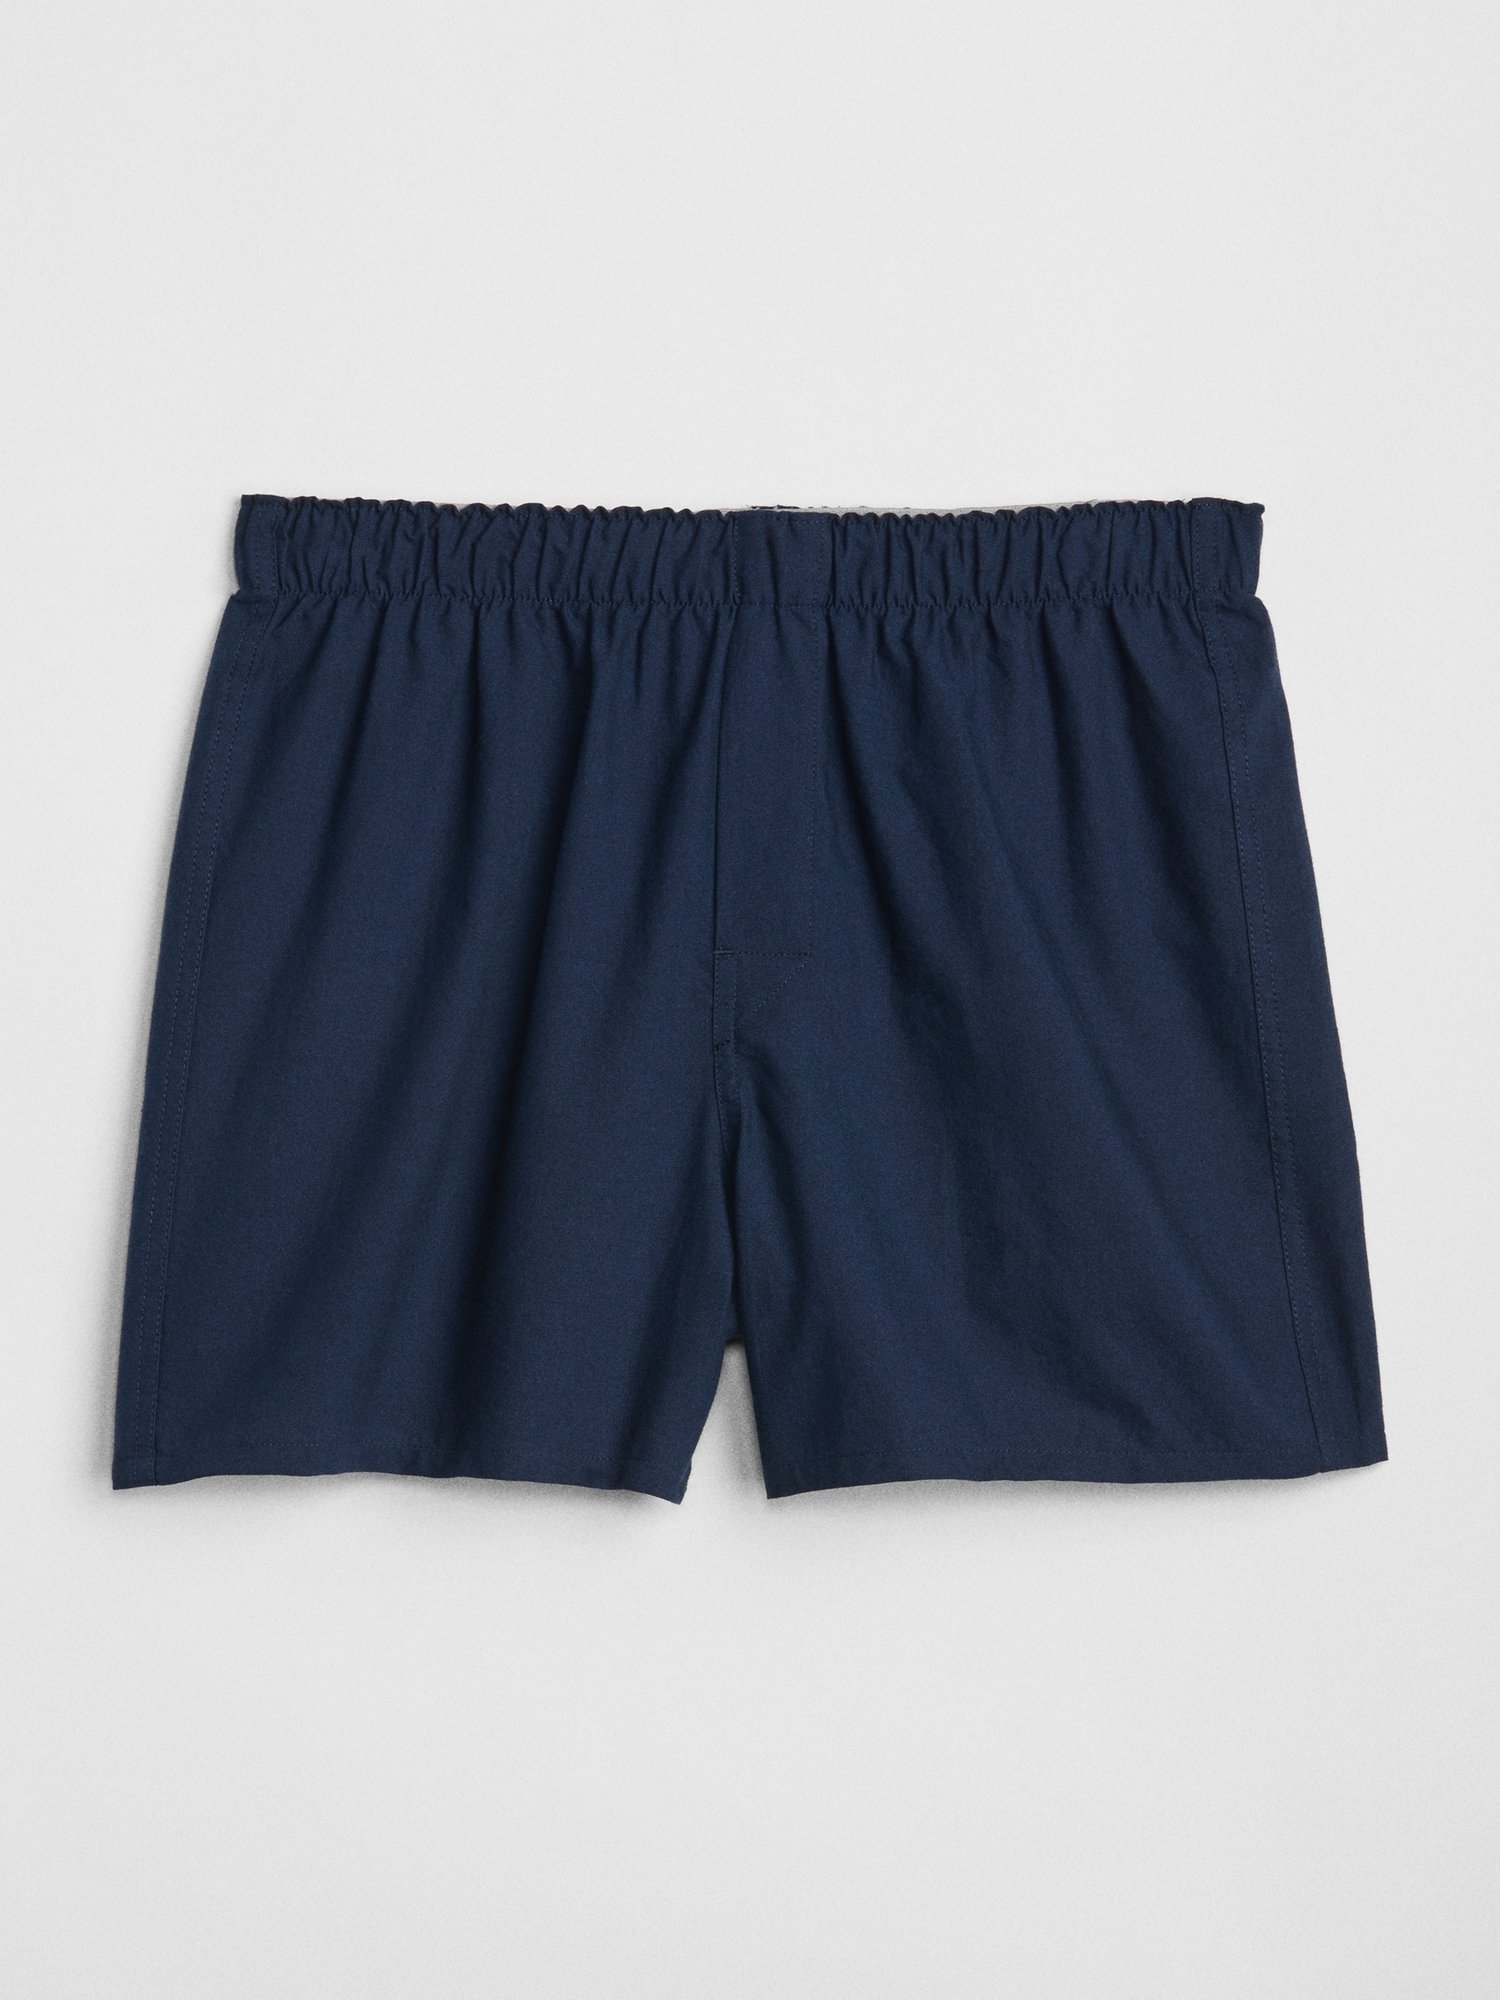 Oxford Boxer product image